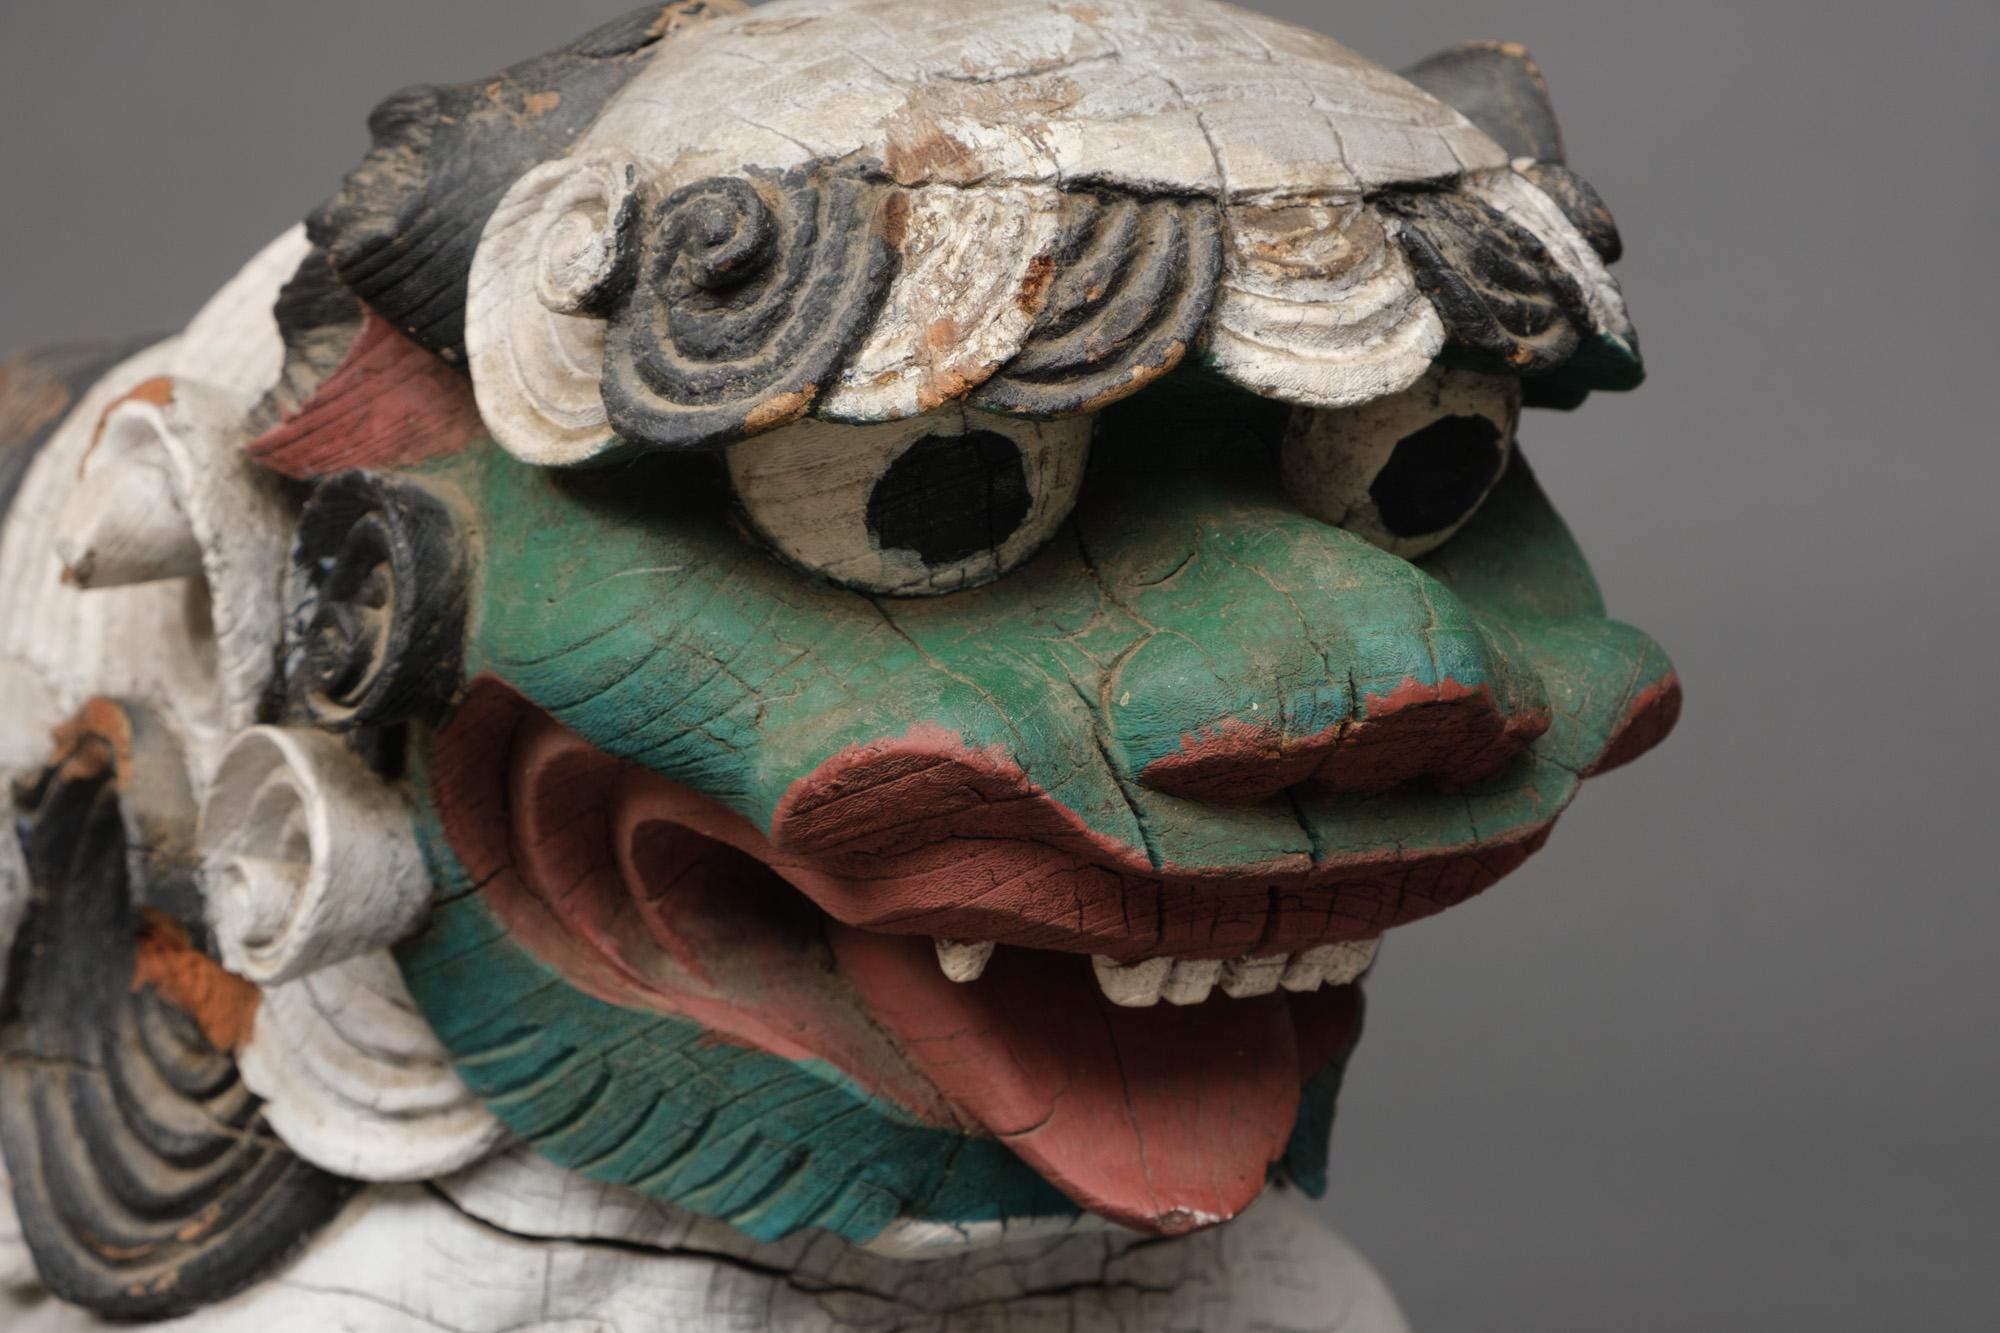 A striking pair of finely carved wooden temple ornaments (kibana) in the shape of threatening shishi (temple lions) painted in the colours green, red, black and white. These are rarely seen completely painted polychrome.

They were ornaments